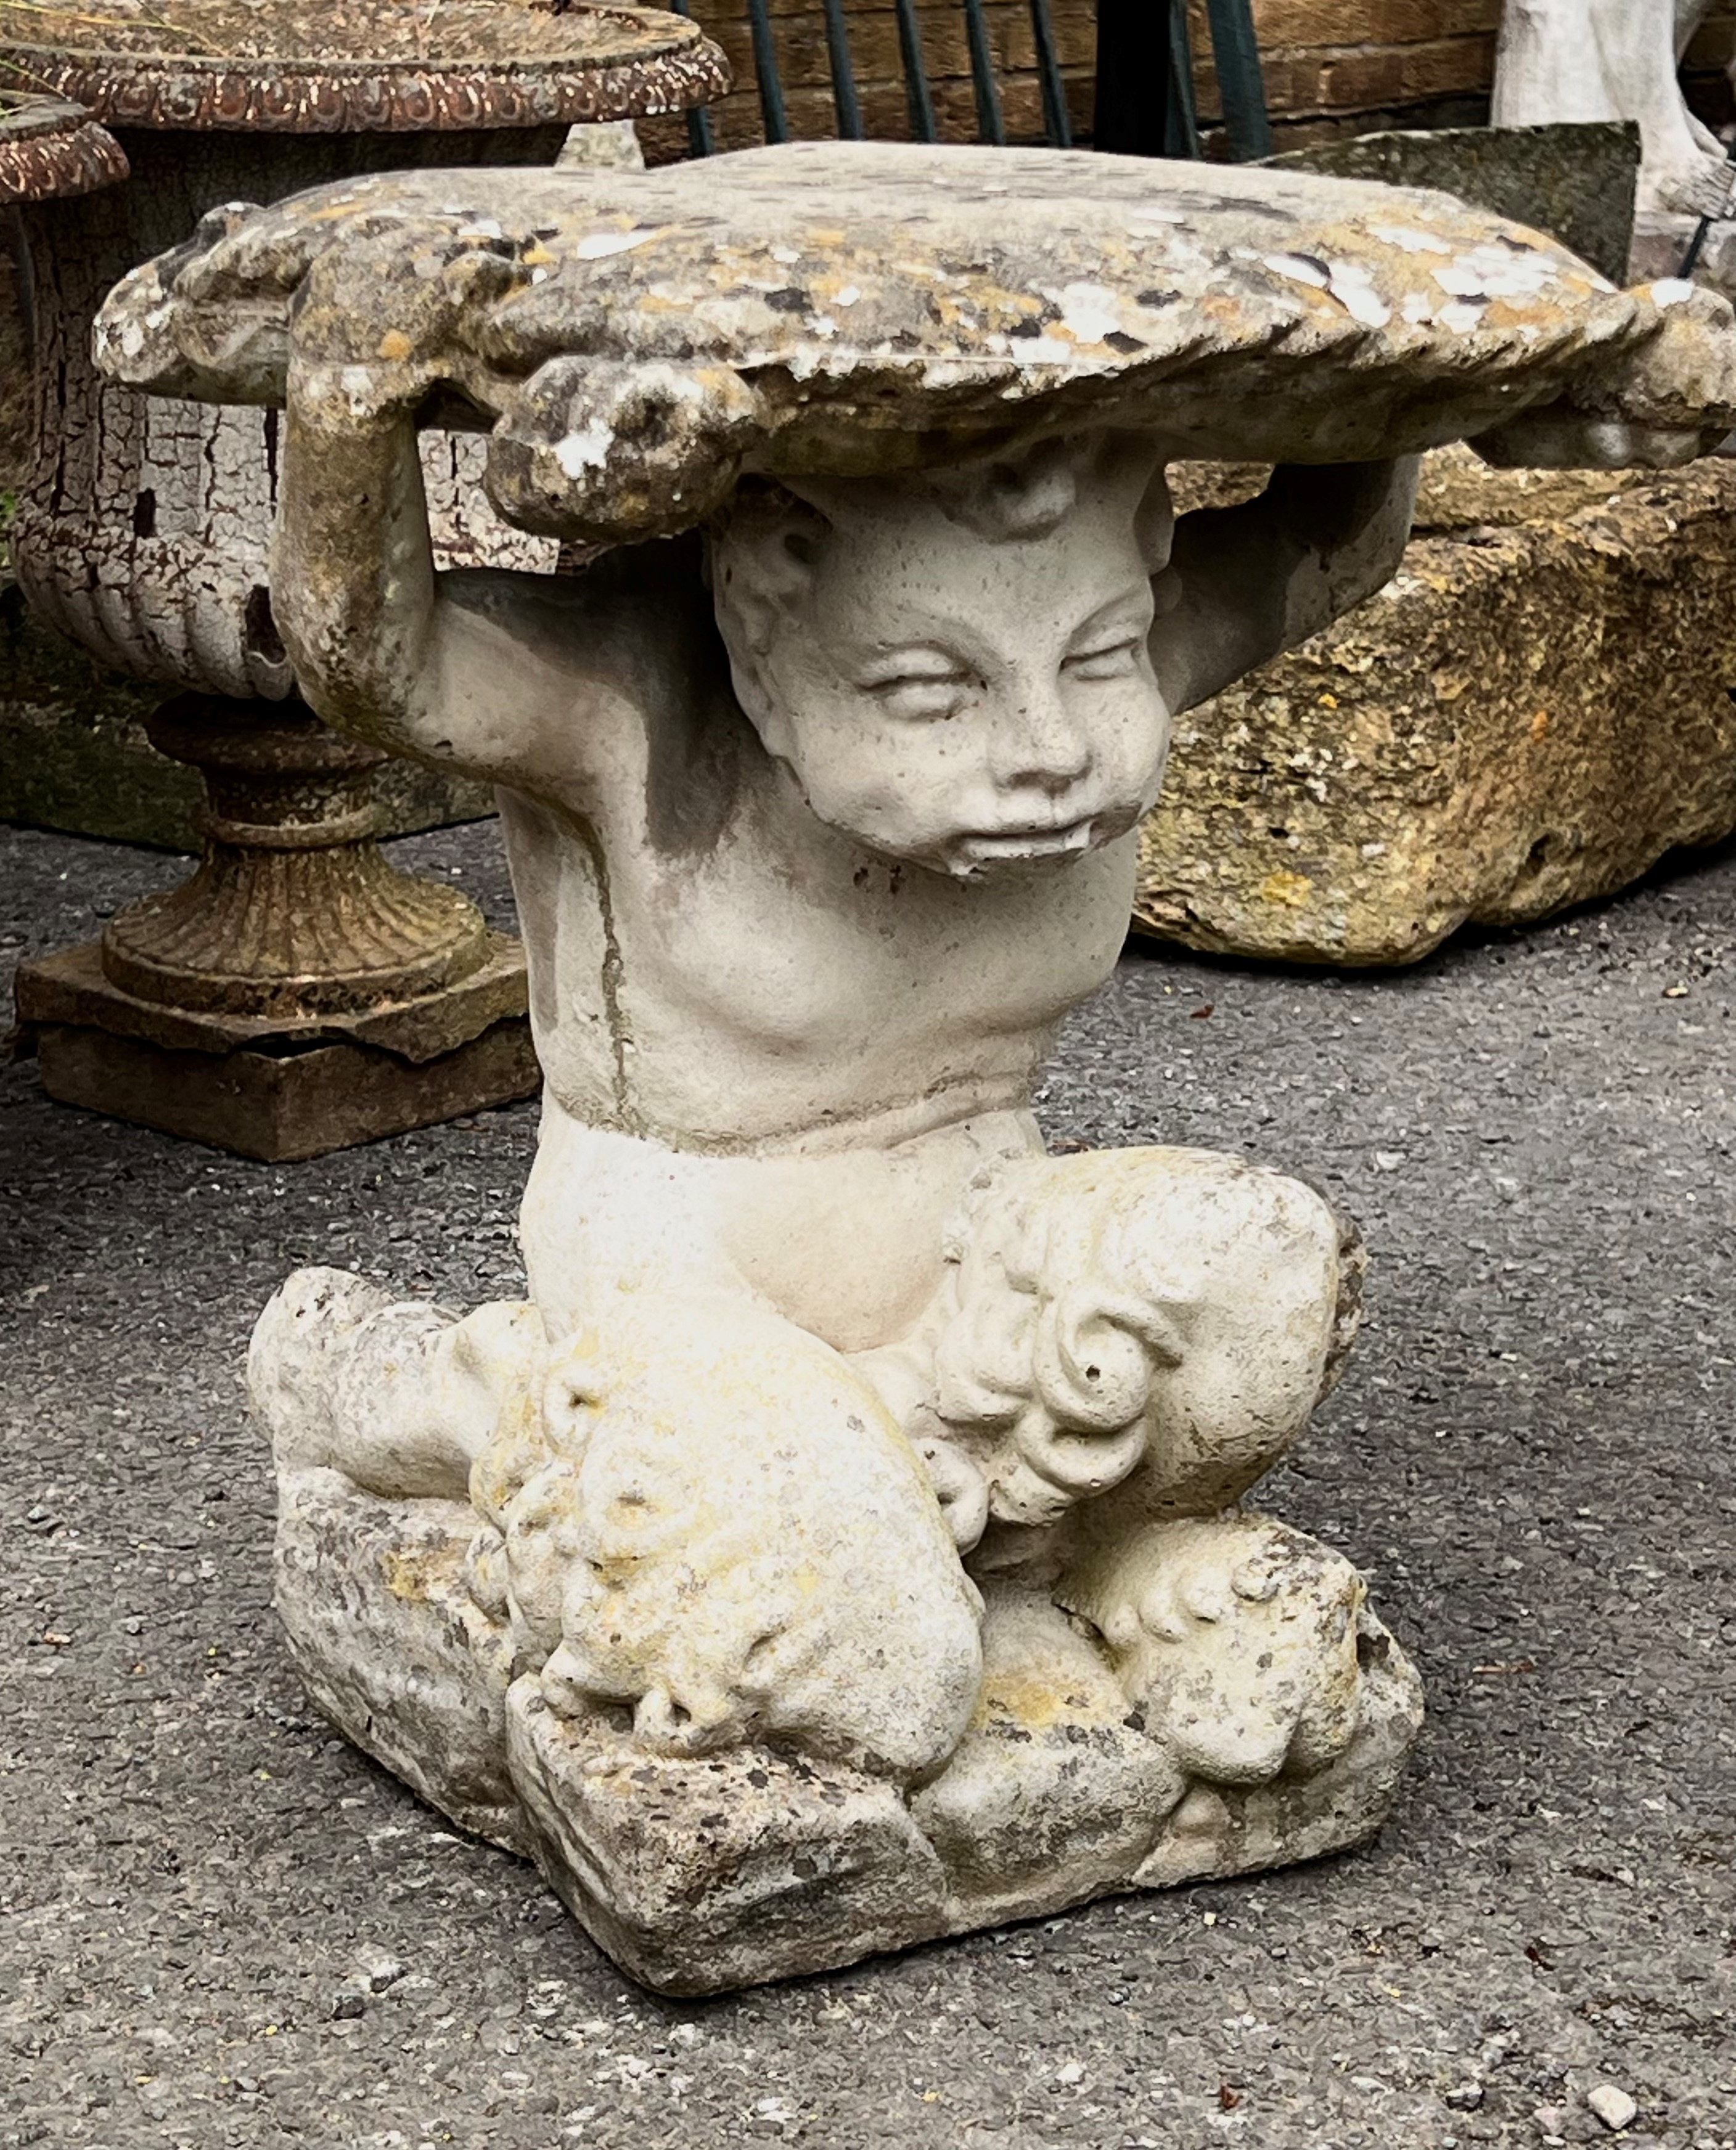 A small composite stone garden table or plinth - in the form of a figure of a boy supporting a